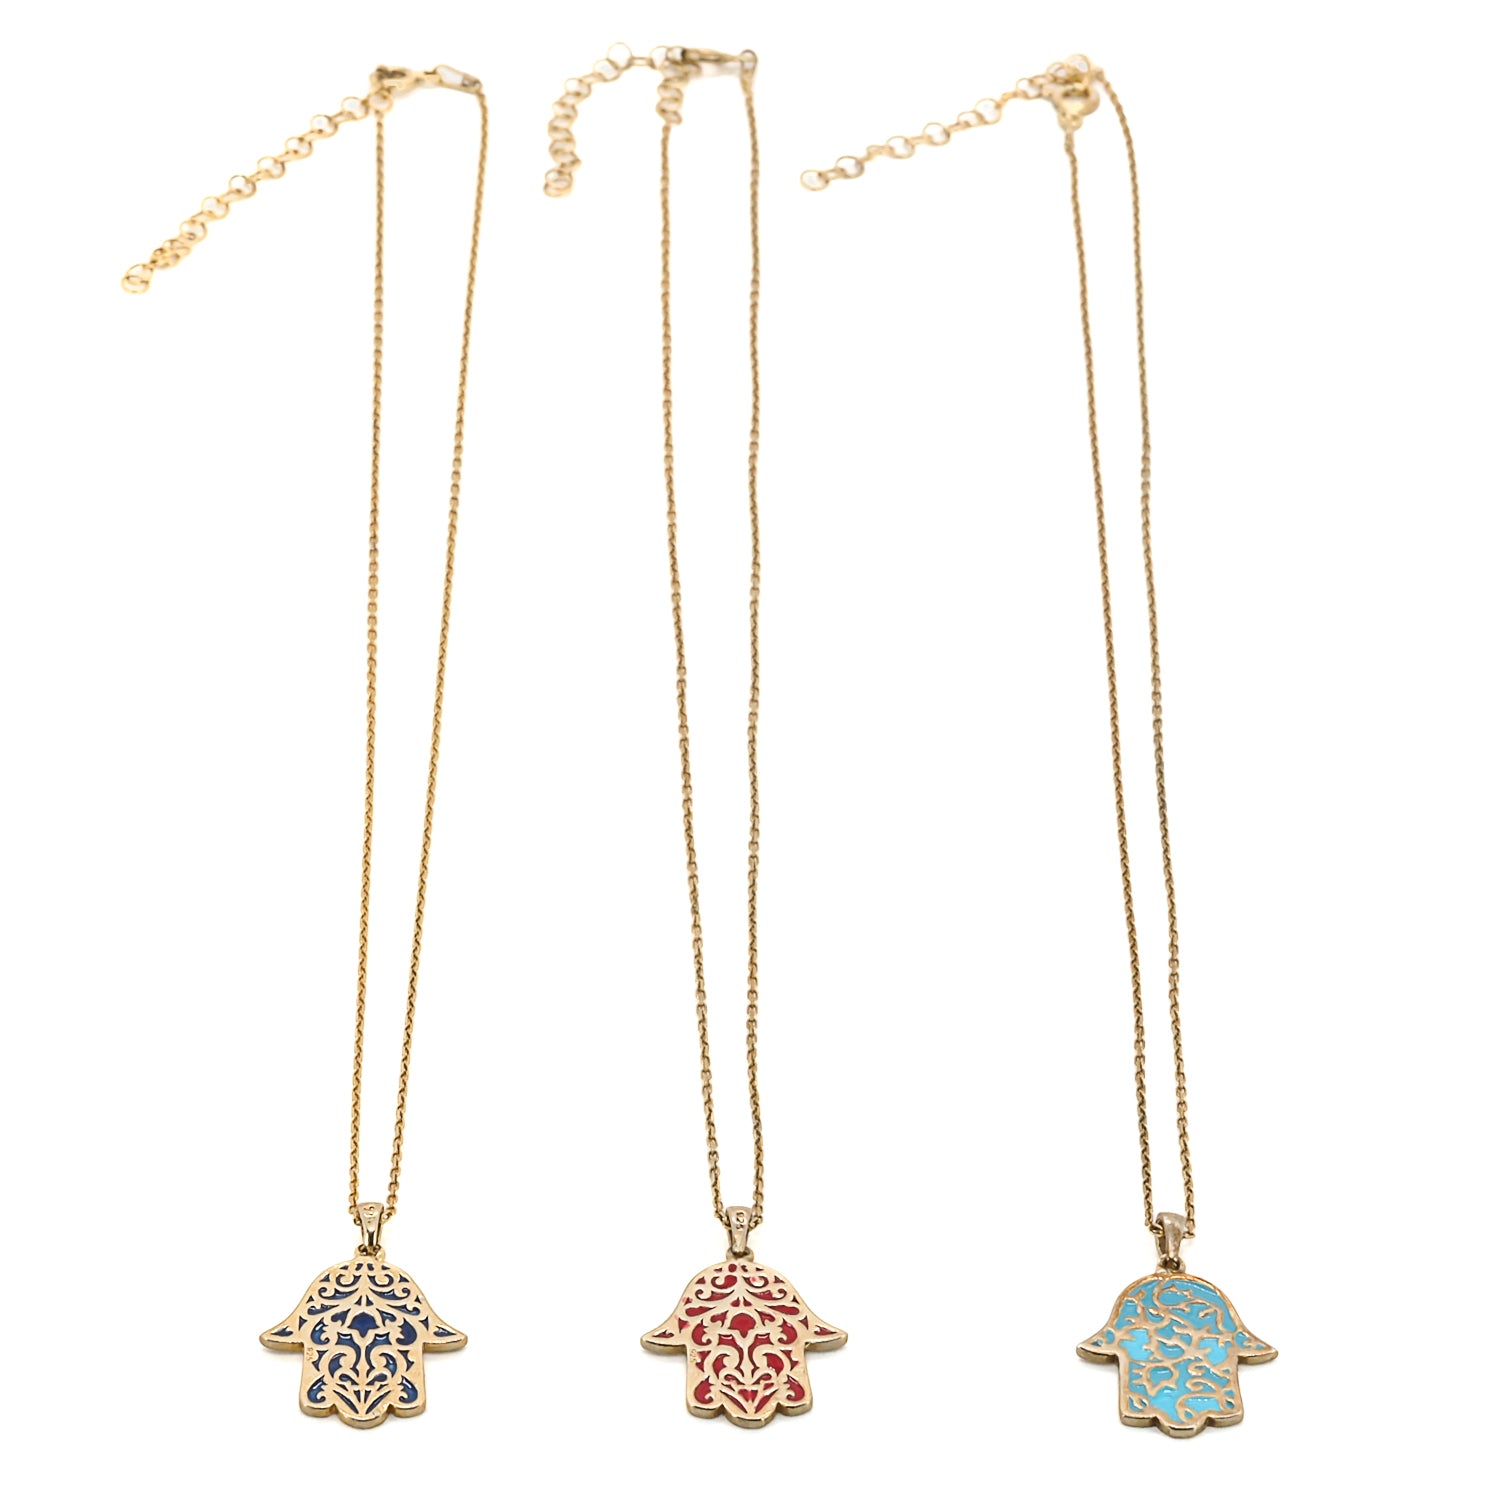 Discover the beauty and meaning of the Stay Positive Hamsa Necklace, a handmade talisman necklace with a vibrant hamsa pendant made of sterling silver and 18K gold plating, reminding you to stay positive.